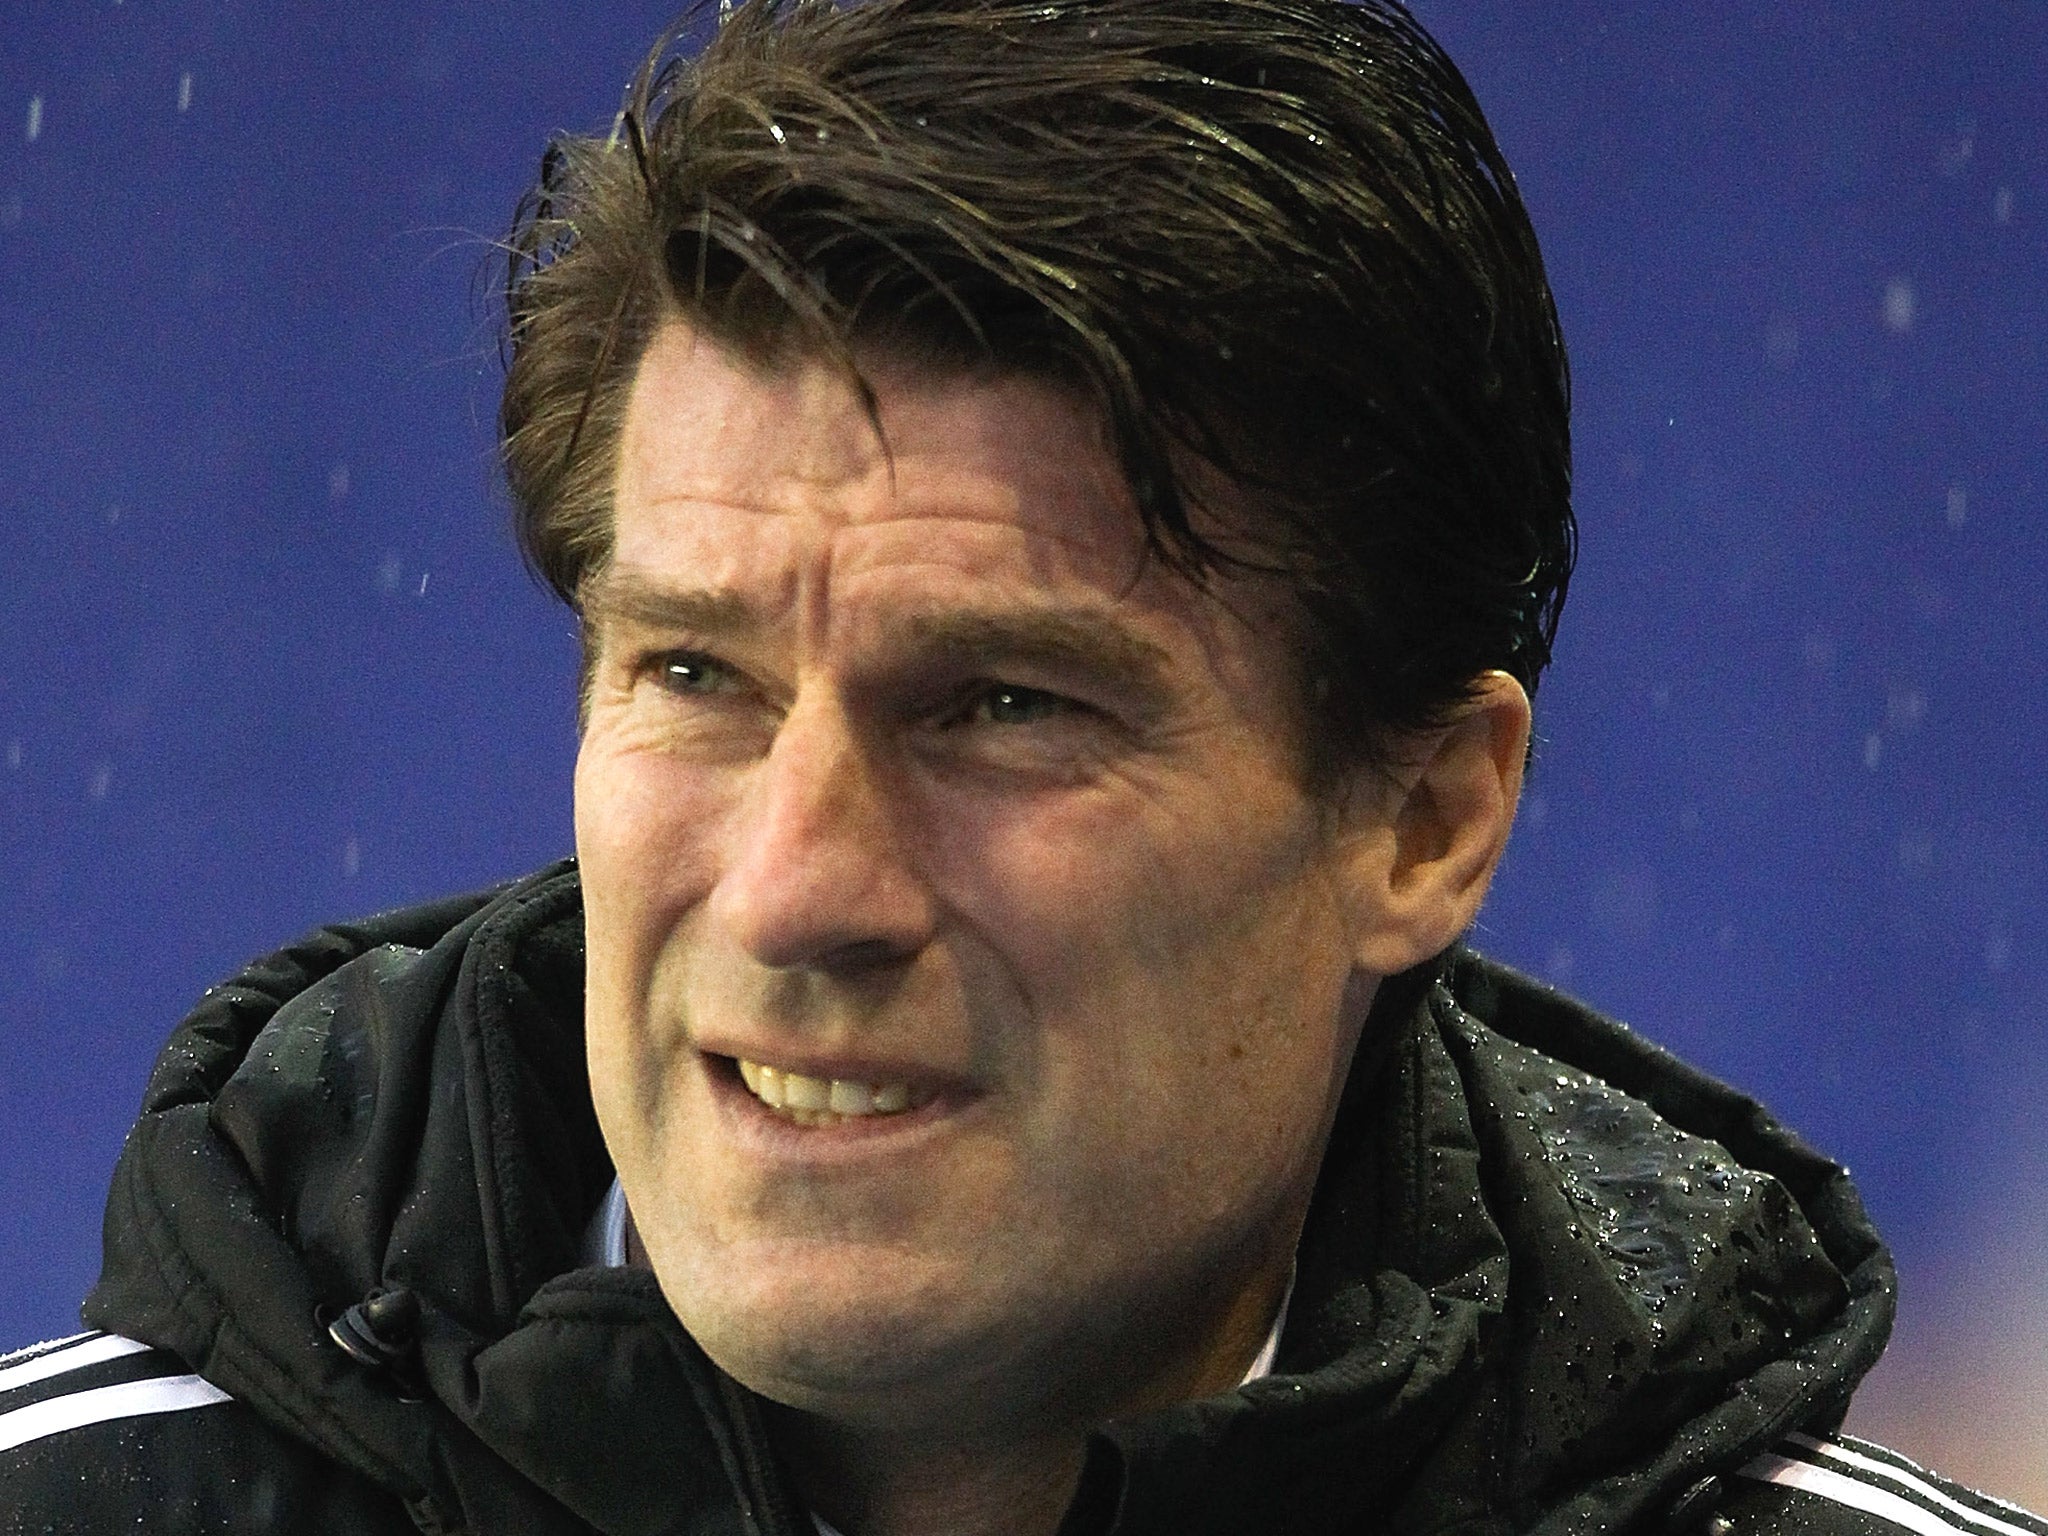 Laudrup was the latest to go